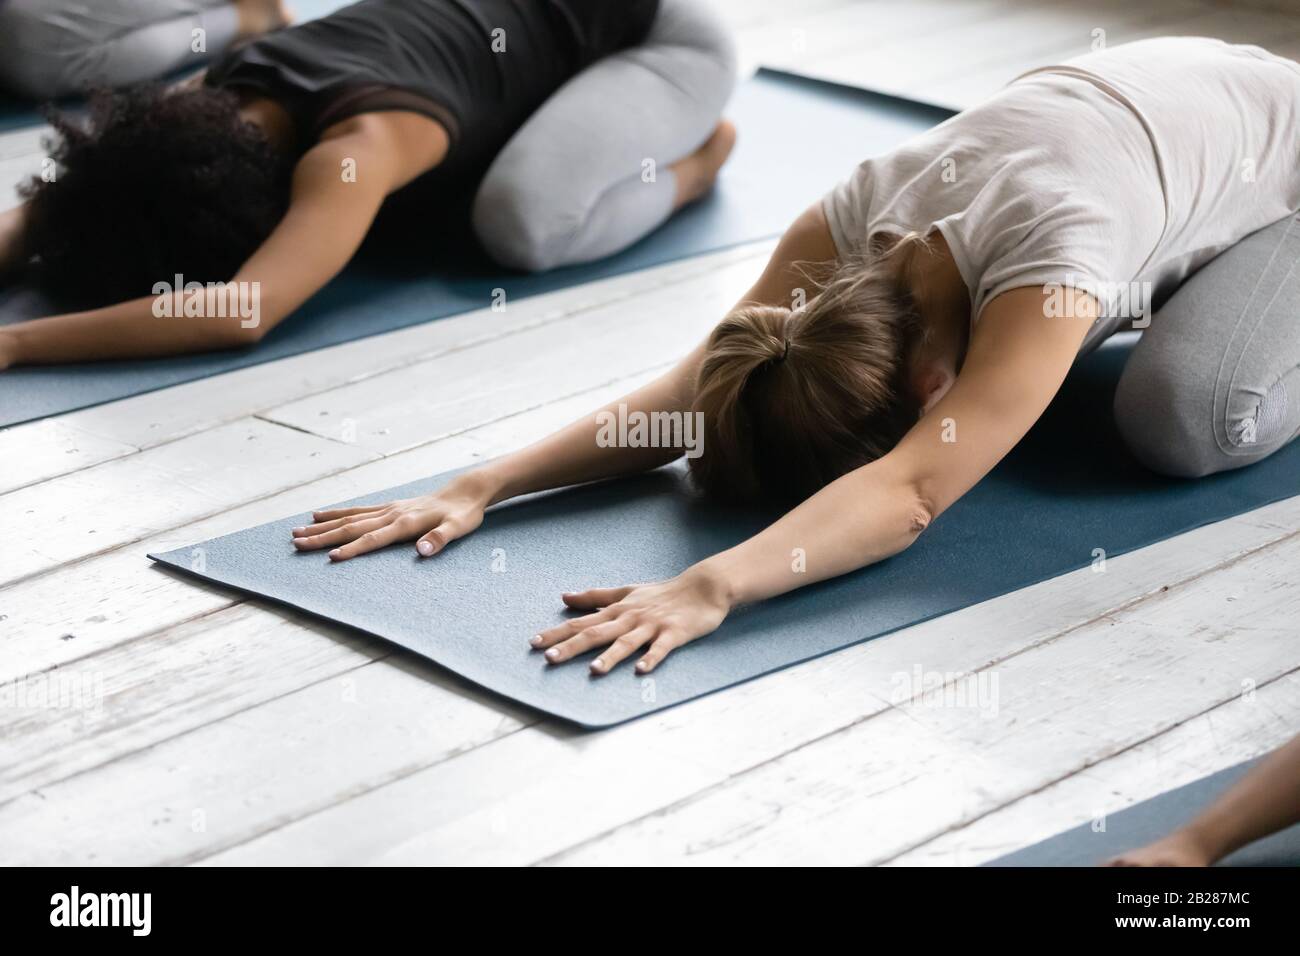 Women practicing Child Pose reducing fatigue after workout close up Stock Photo